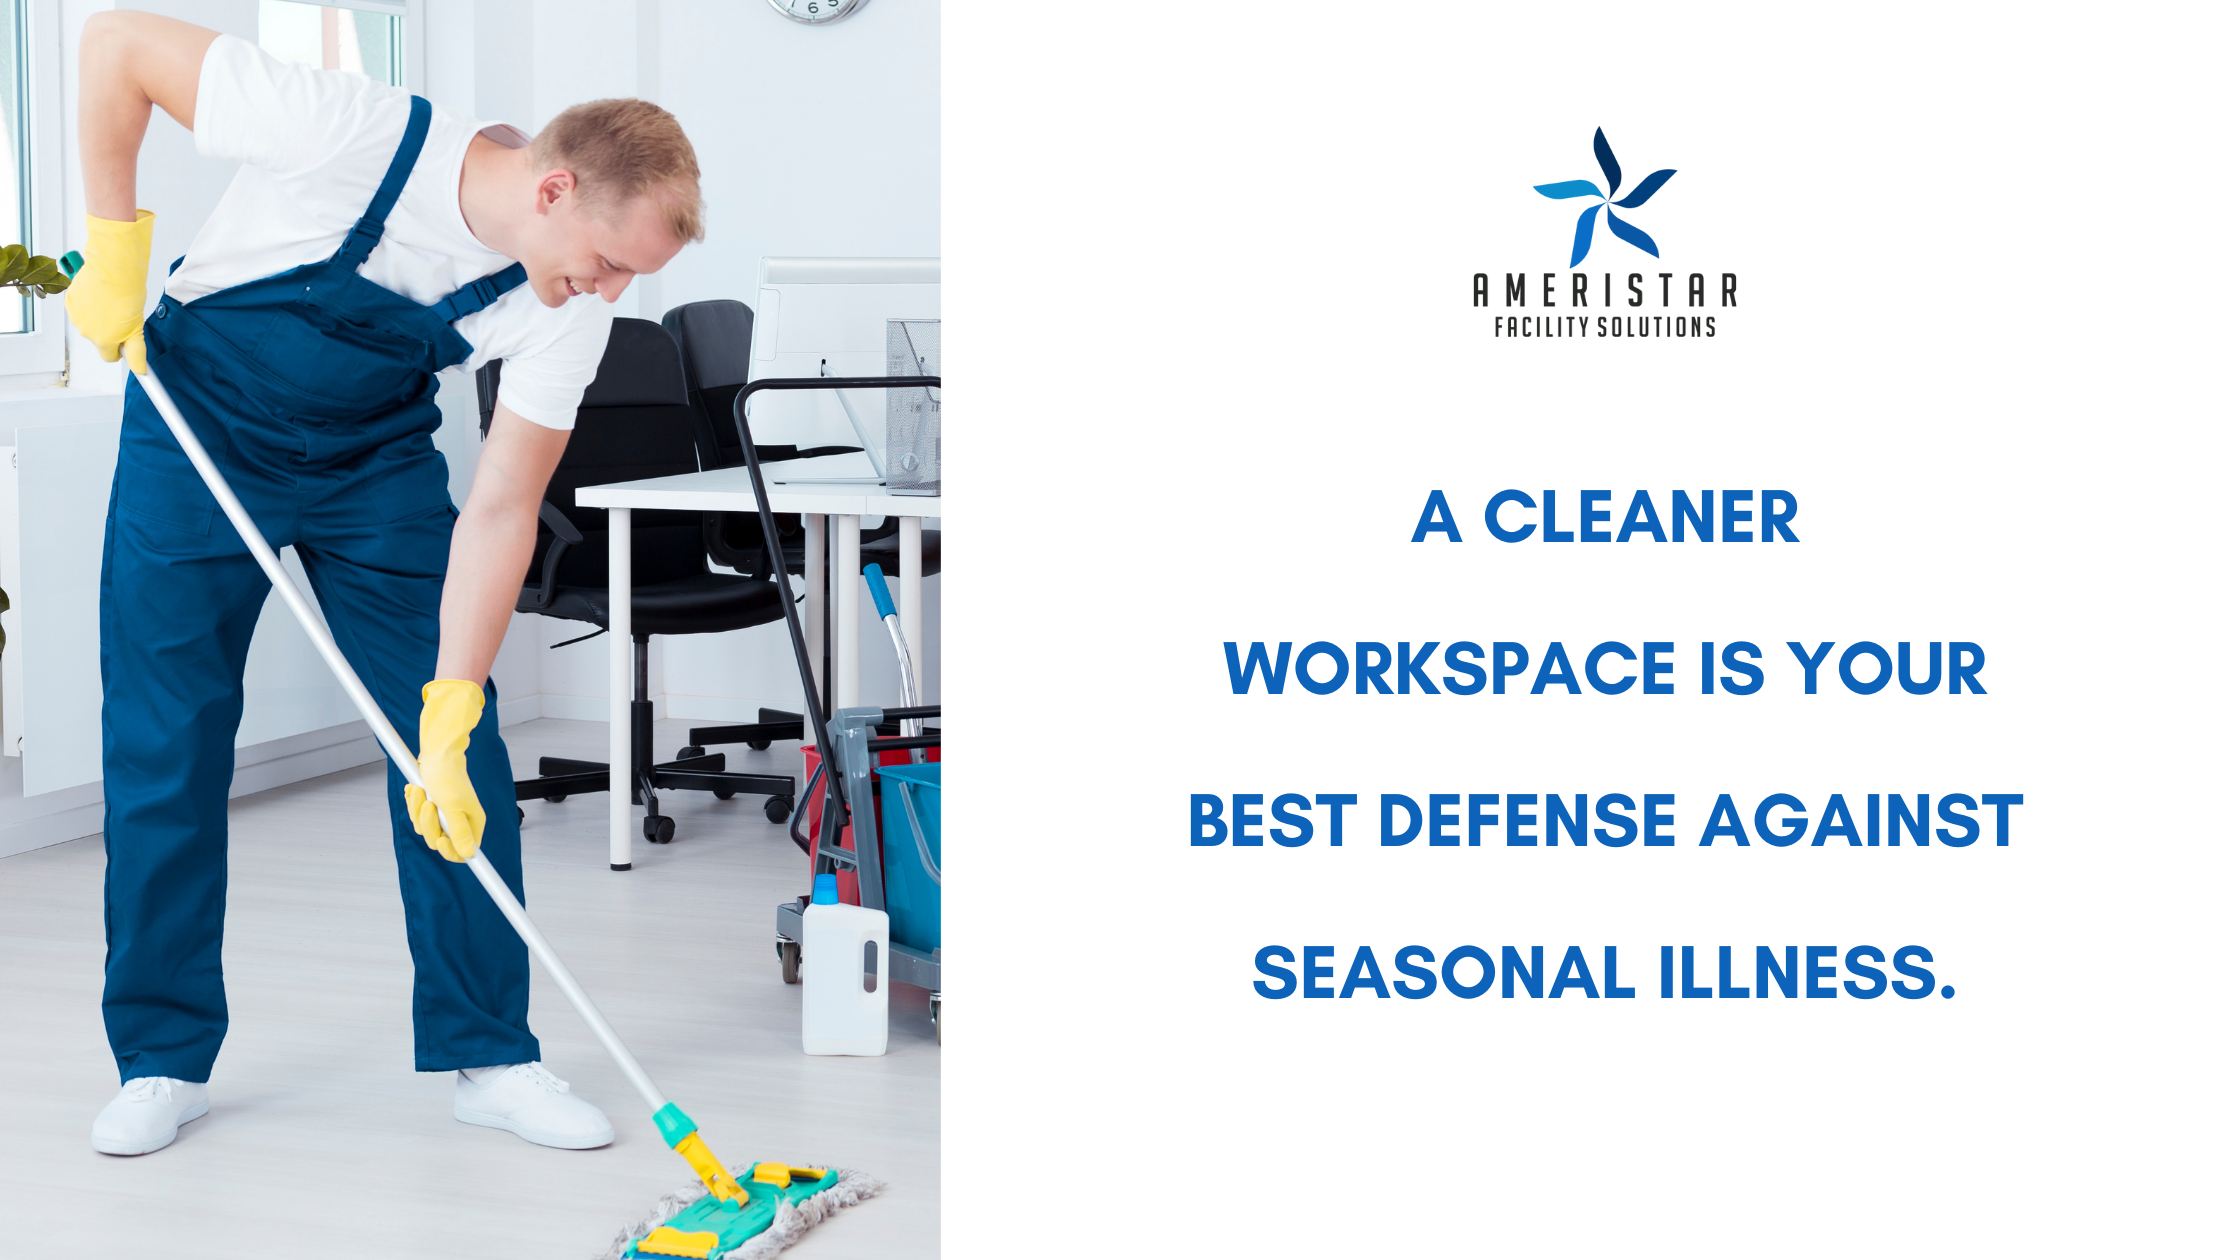 A Cleaner Workspace is Your Best Defense Against Seasonal Illness